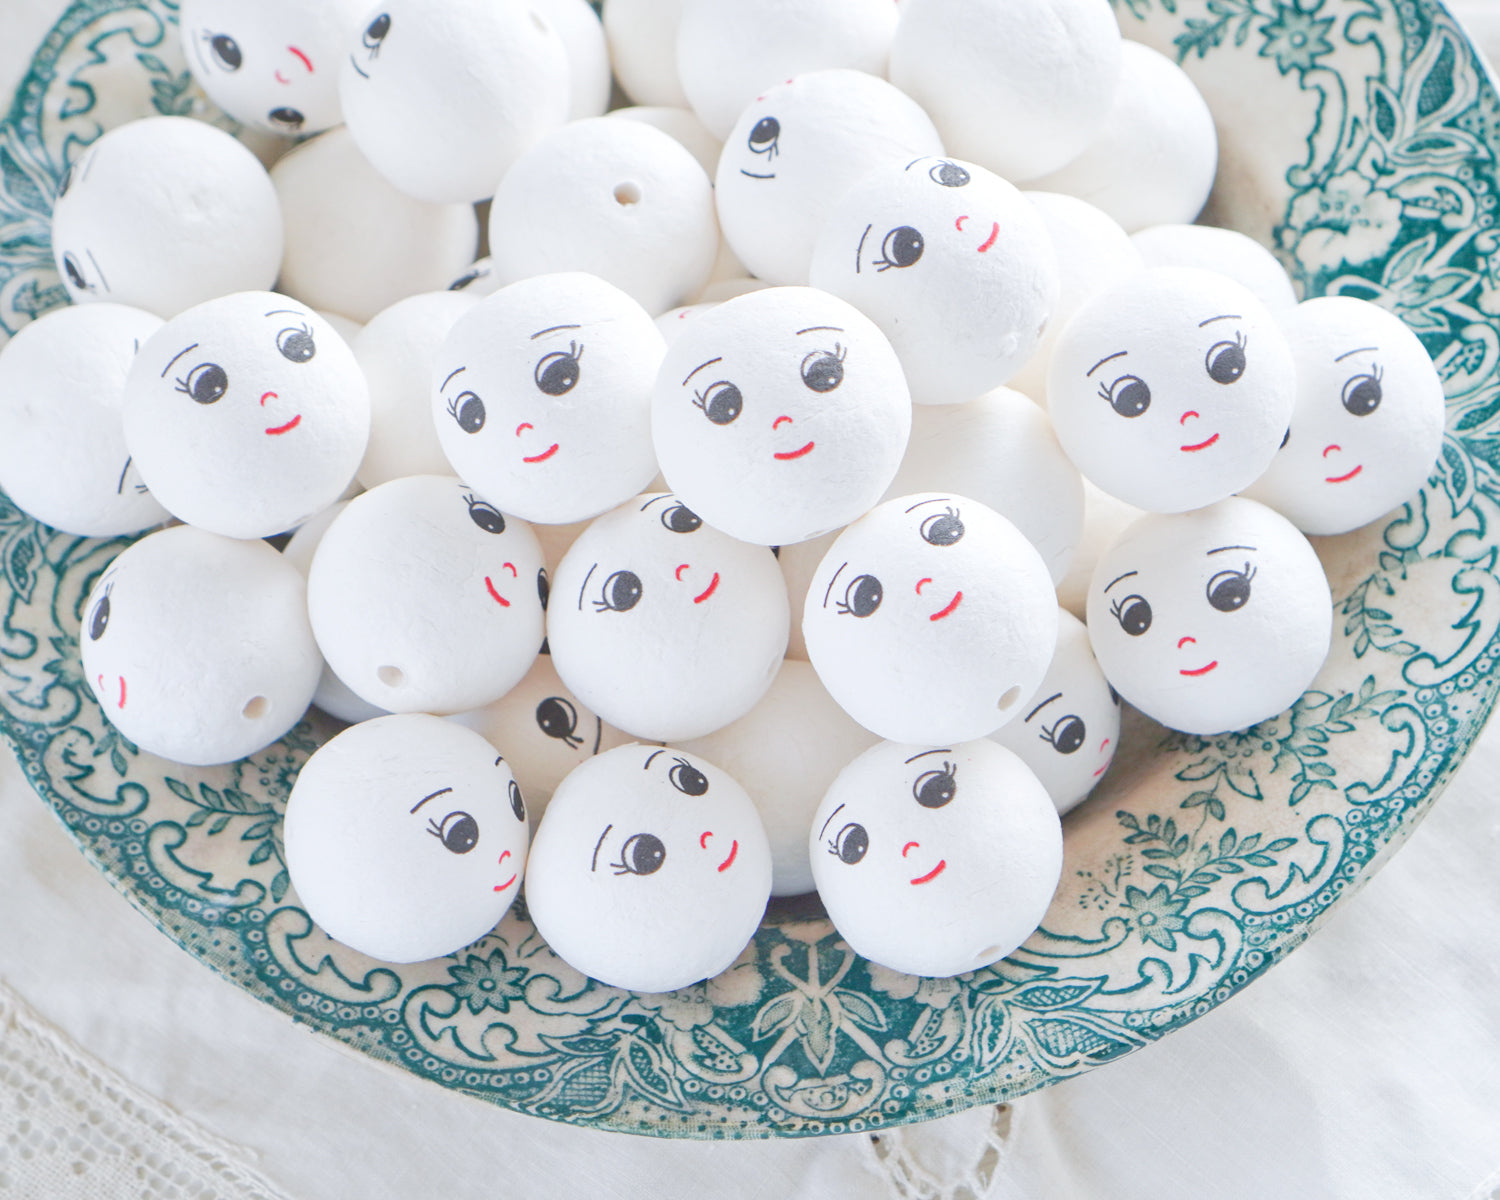 Spun Cotton Heads: DREAMER - 30mm White Doll Heads with Faces, 12 Pcs.